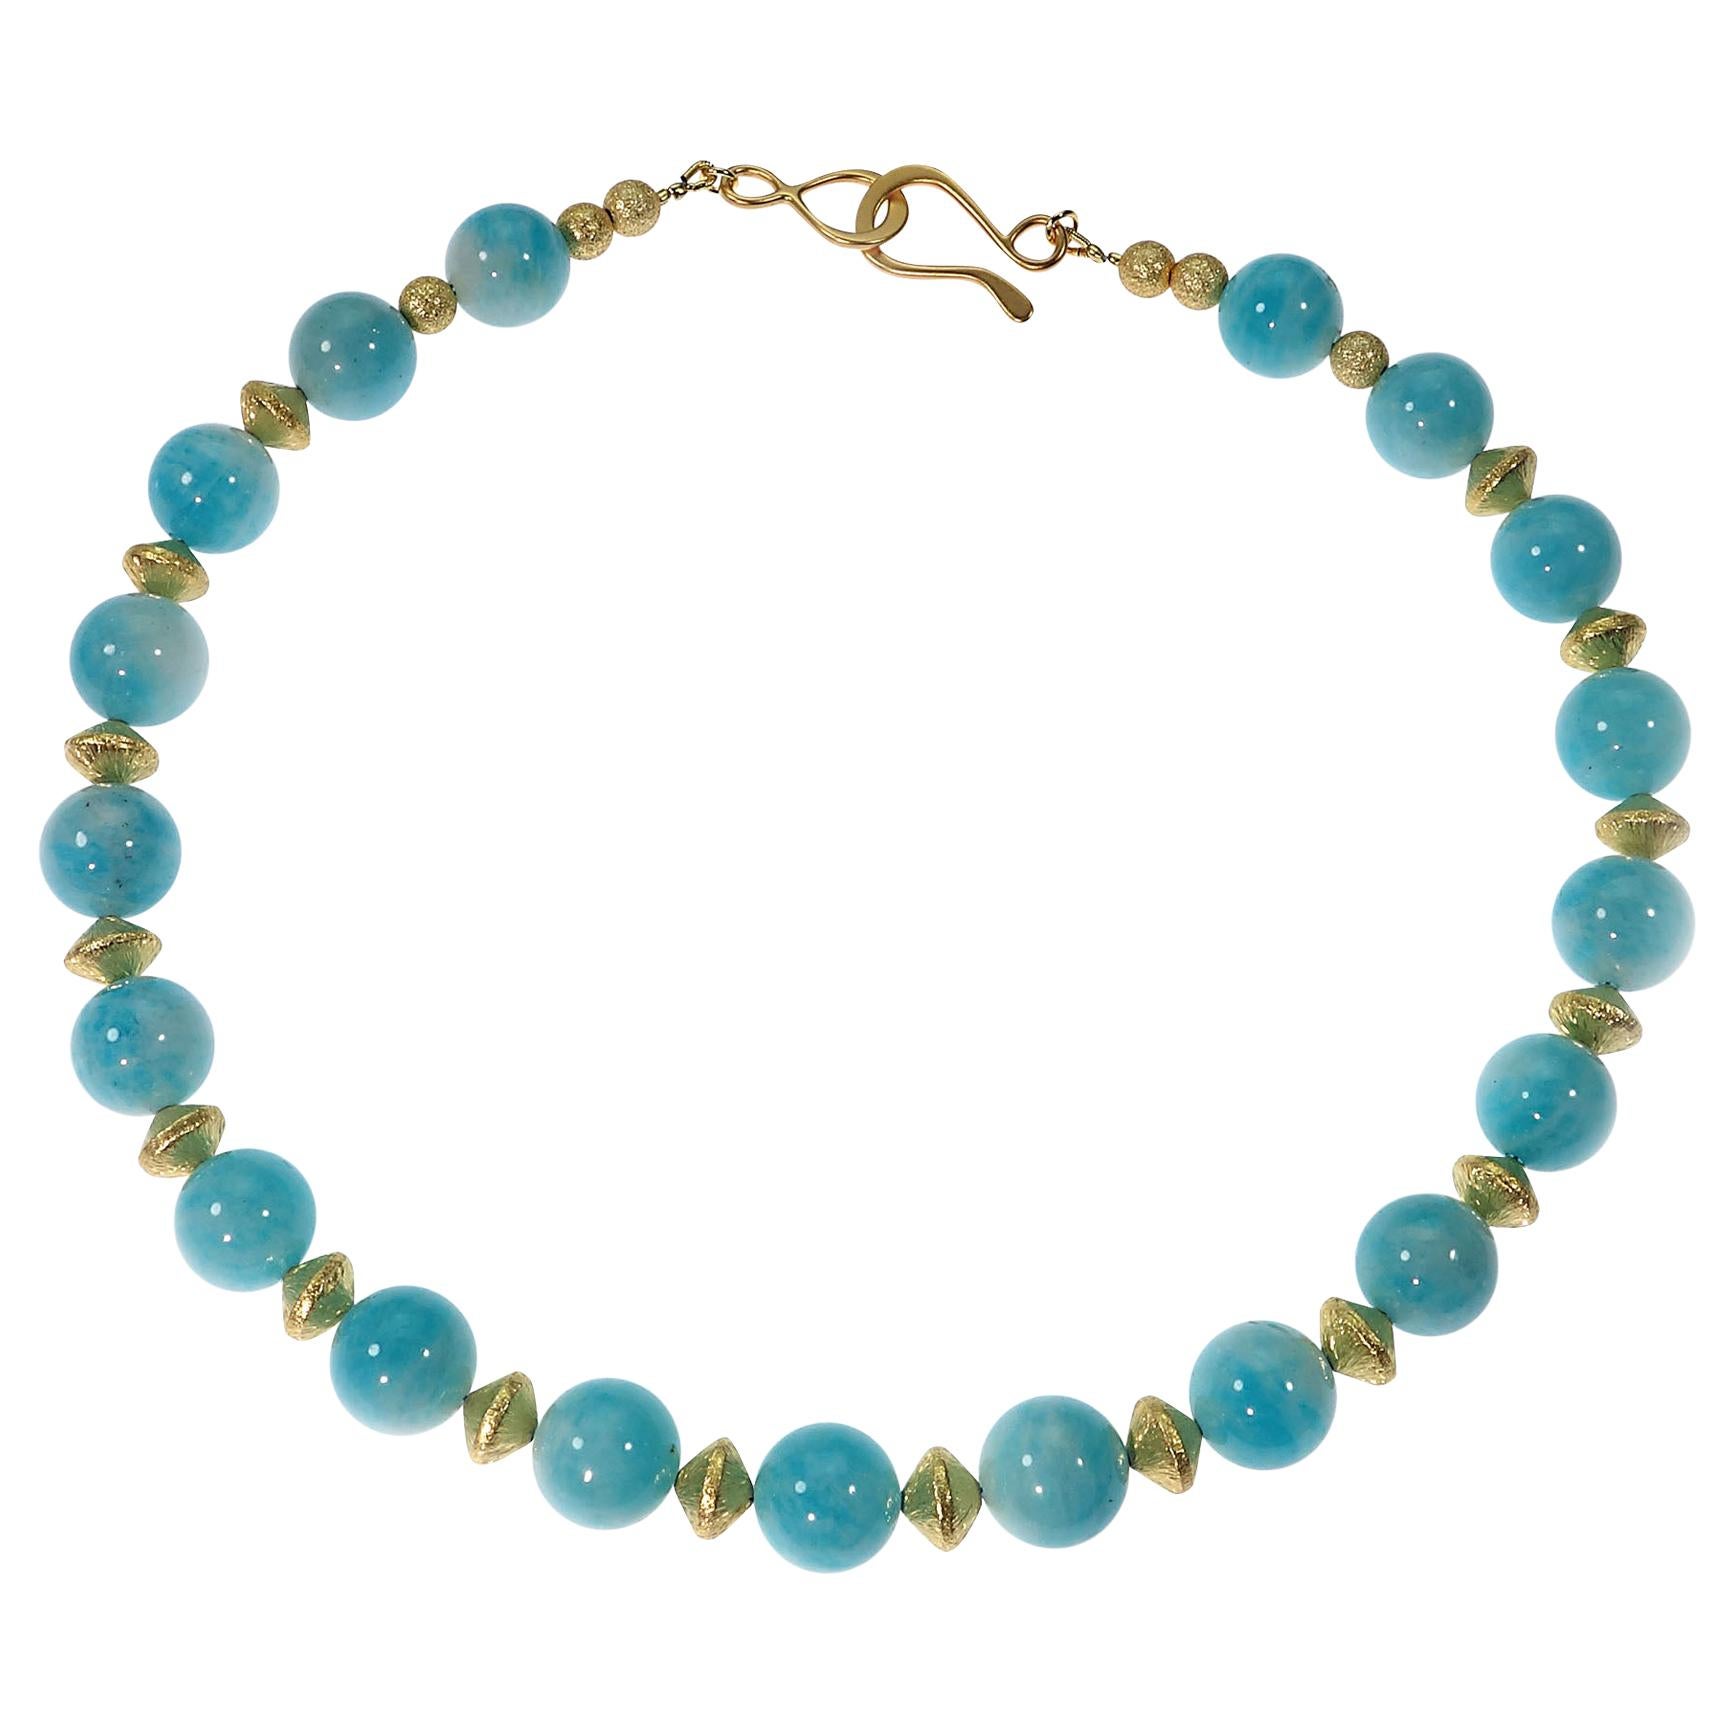 Gemjunky Choker Necklace of Glowing Amazonite with Gold Tone Accents